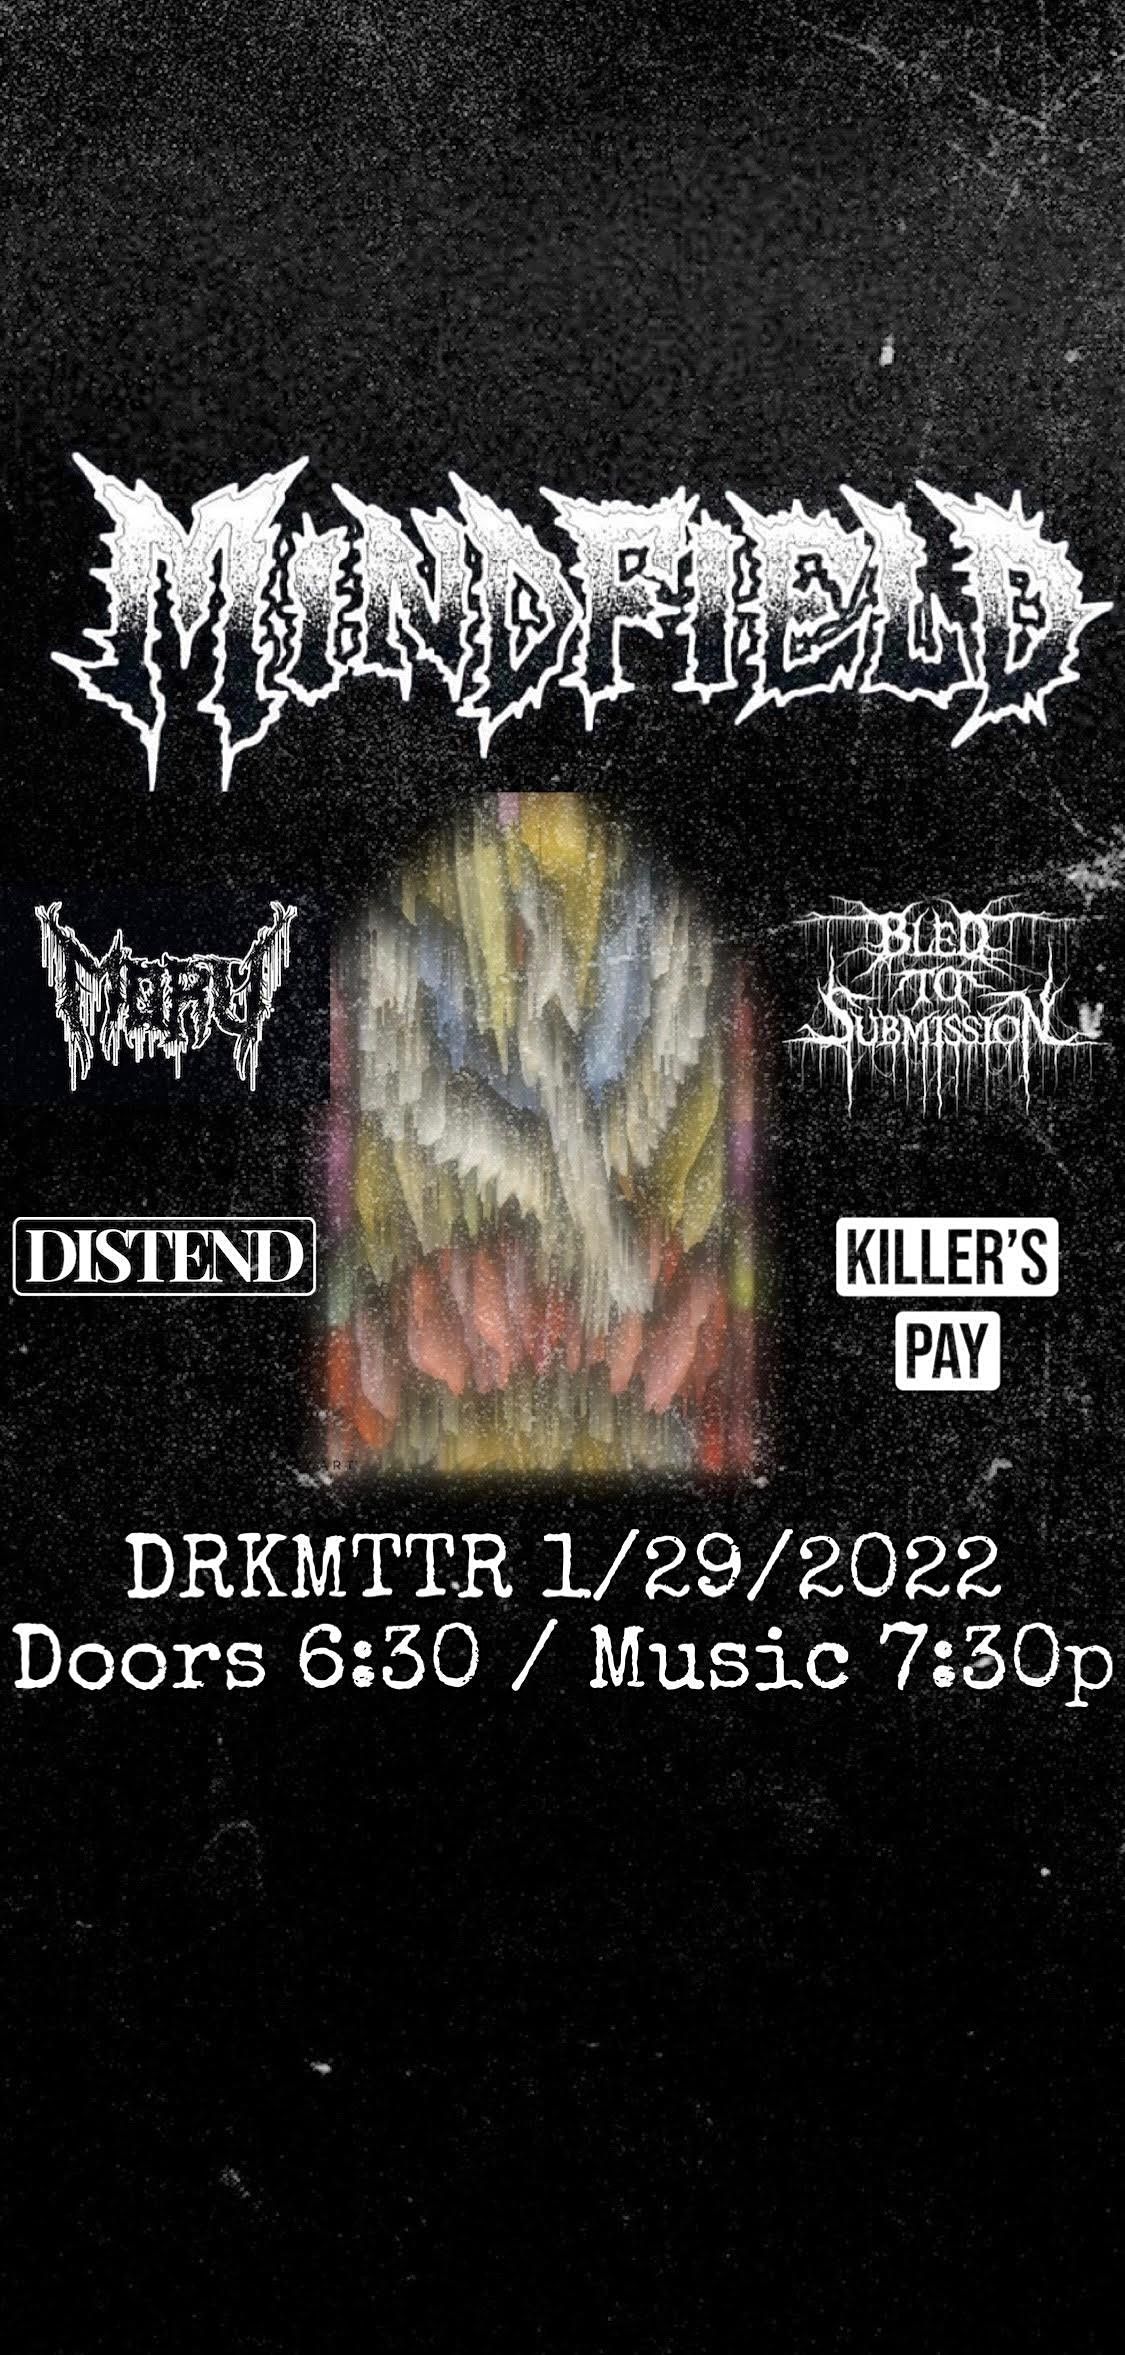 Mindfield w\/ Bled to Submission, Moru, Distend